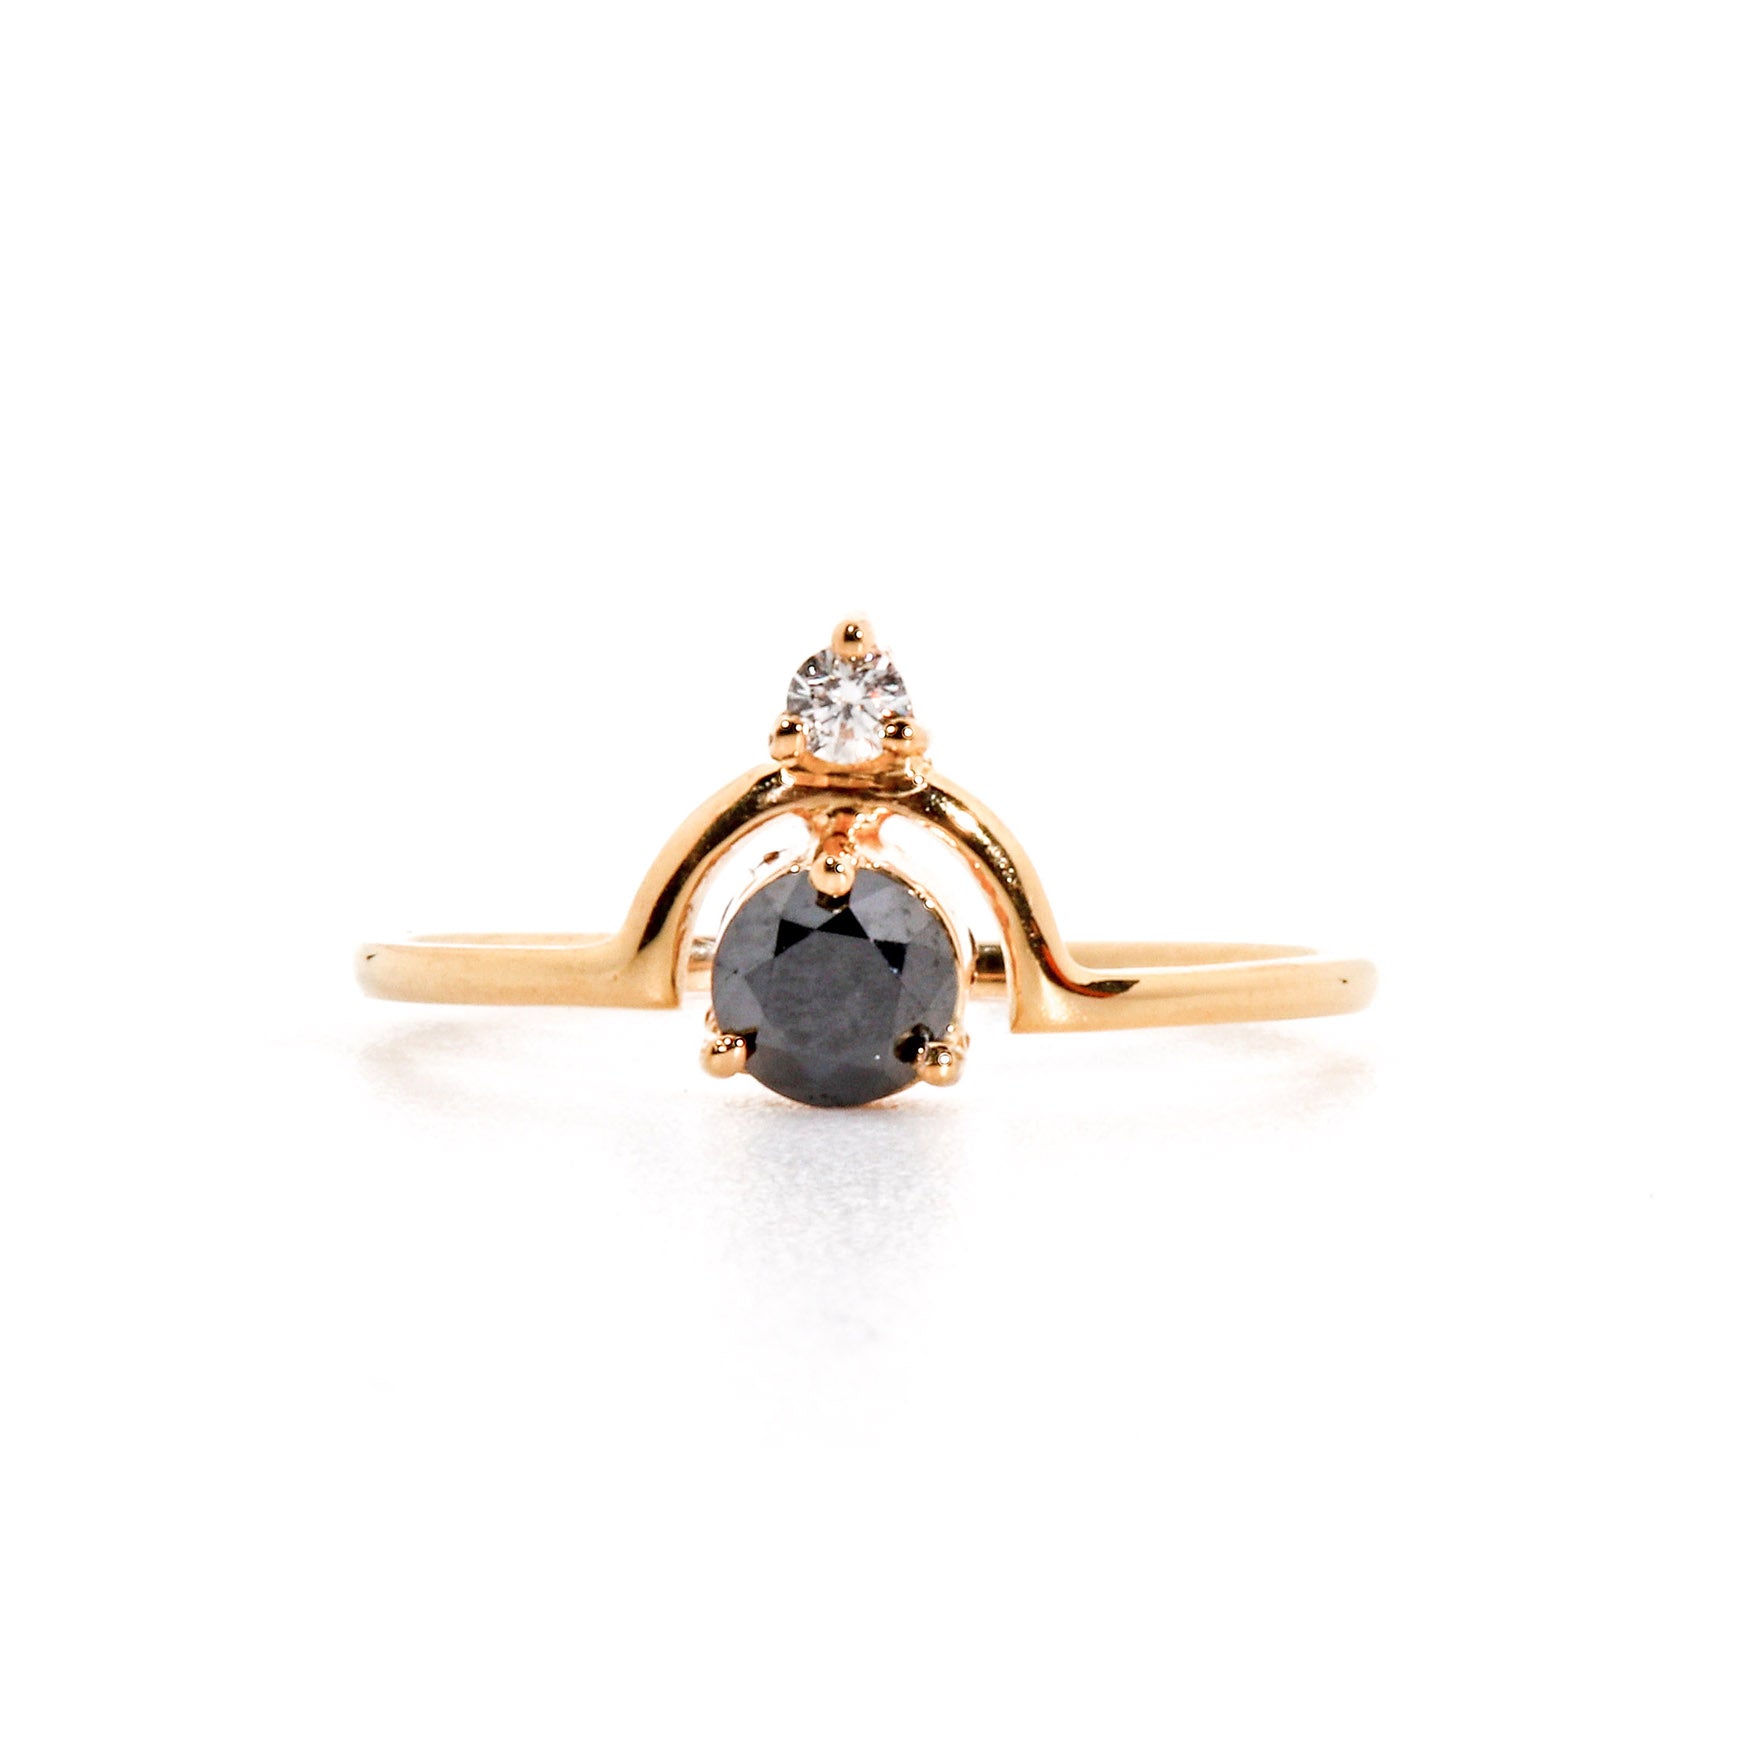 Double Detour Ring with Round Black Diamond (0.41 ct) and White Diamond, Solid 14k Gold | ONE-OF-A-KIND